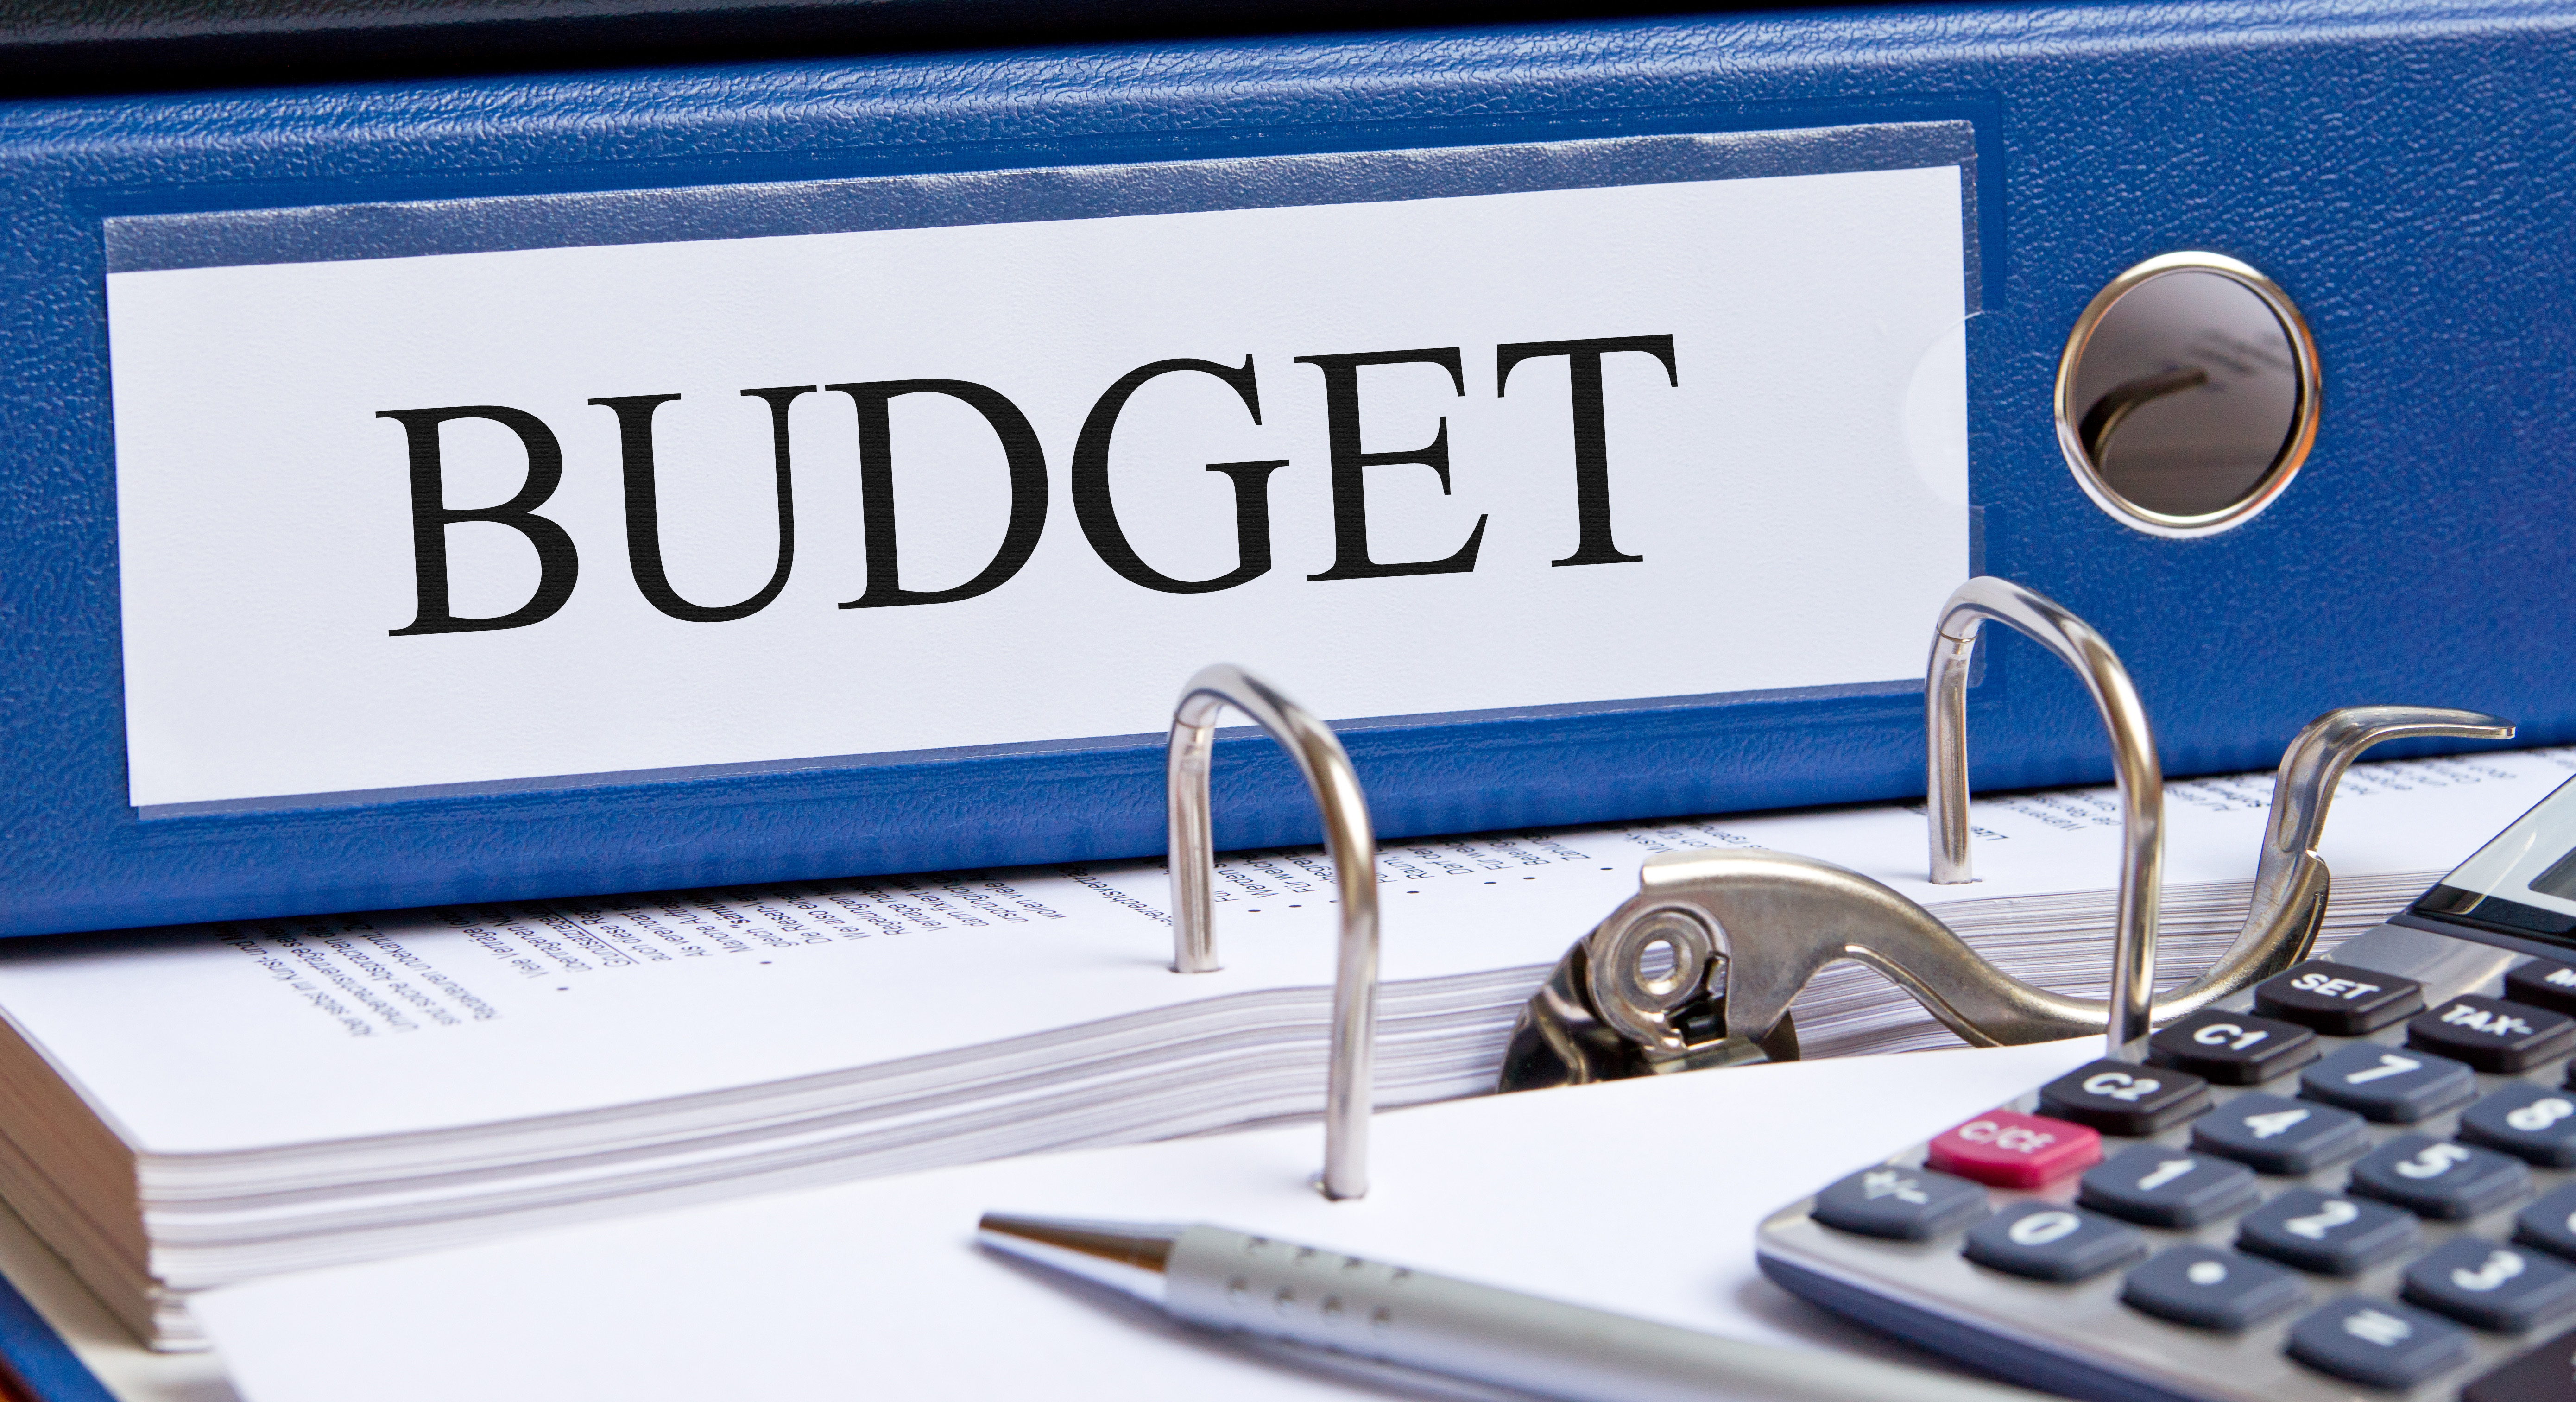 Would you like to have a budget for your business, but don’t know where to start?